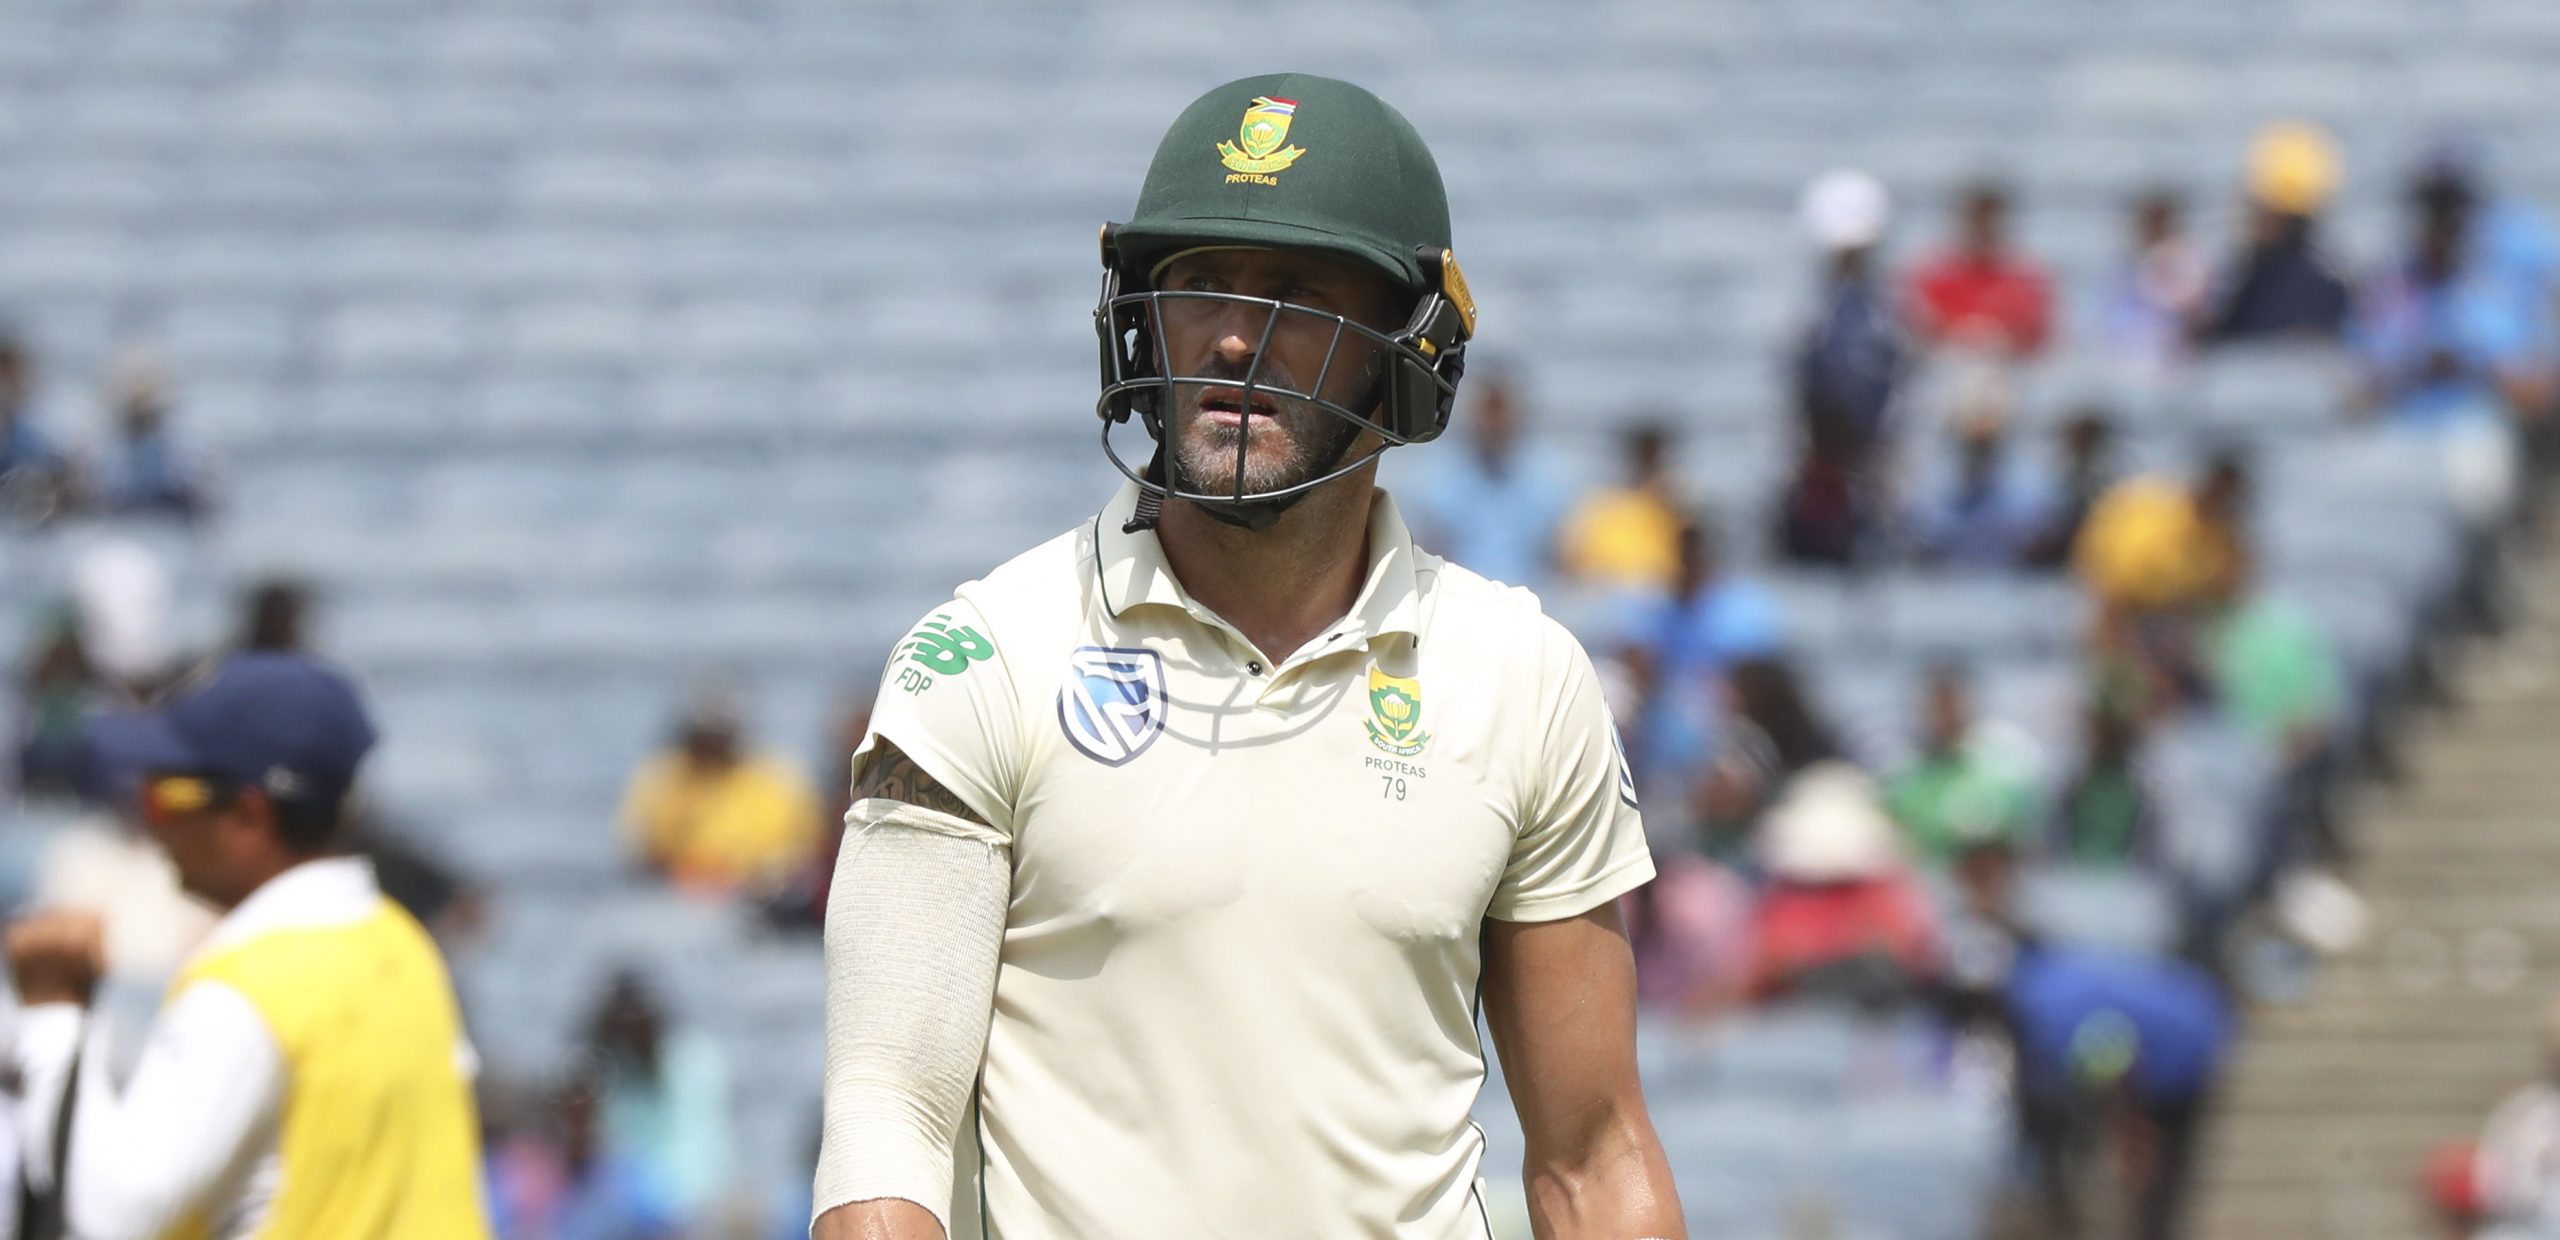 Filling in the gaps of the Proteas’ top 6